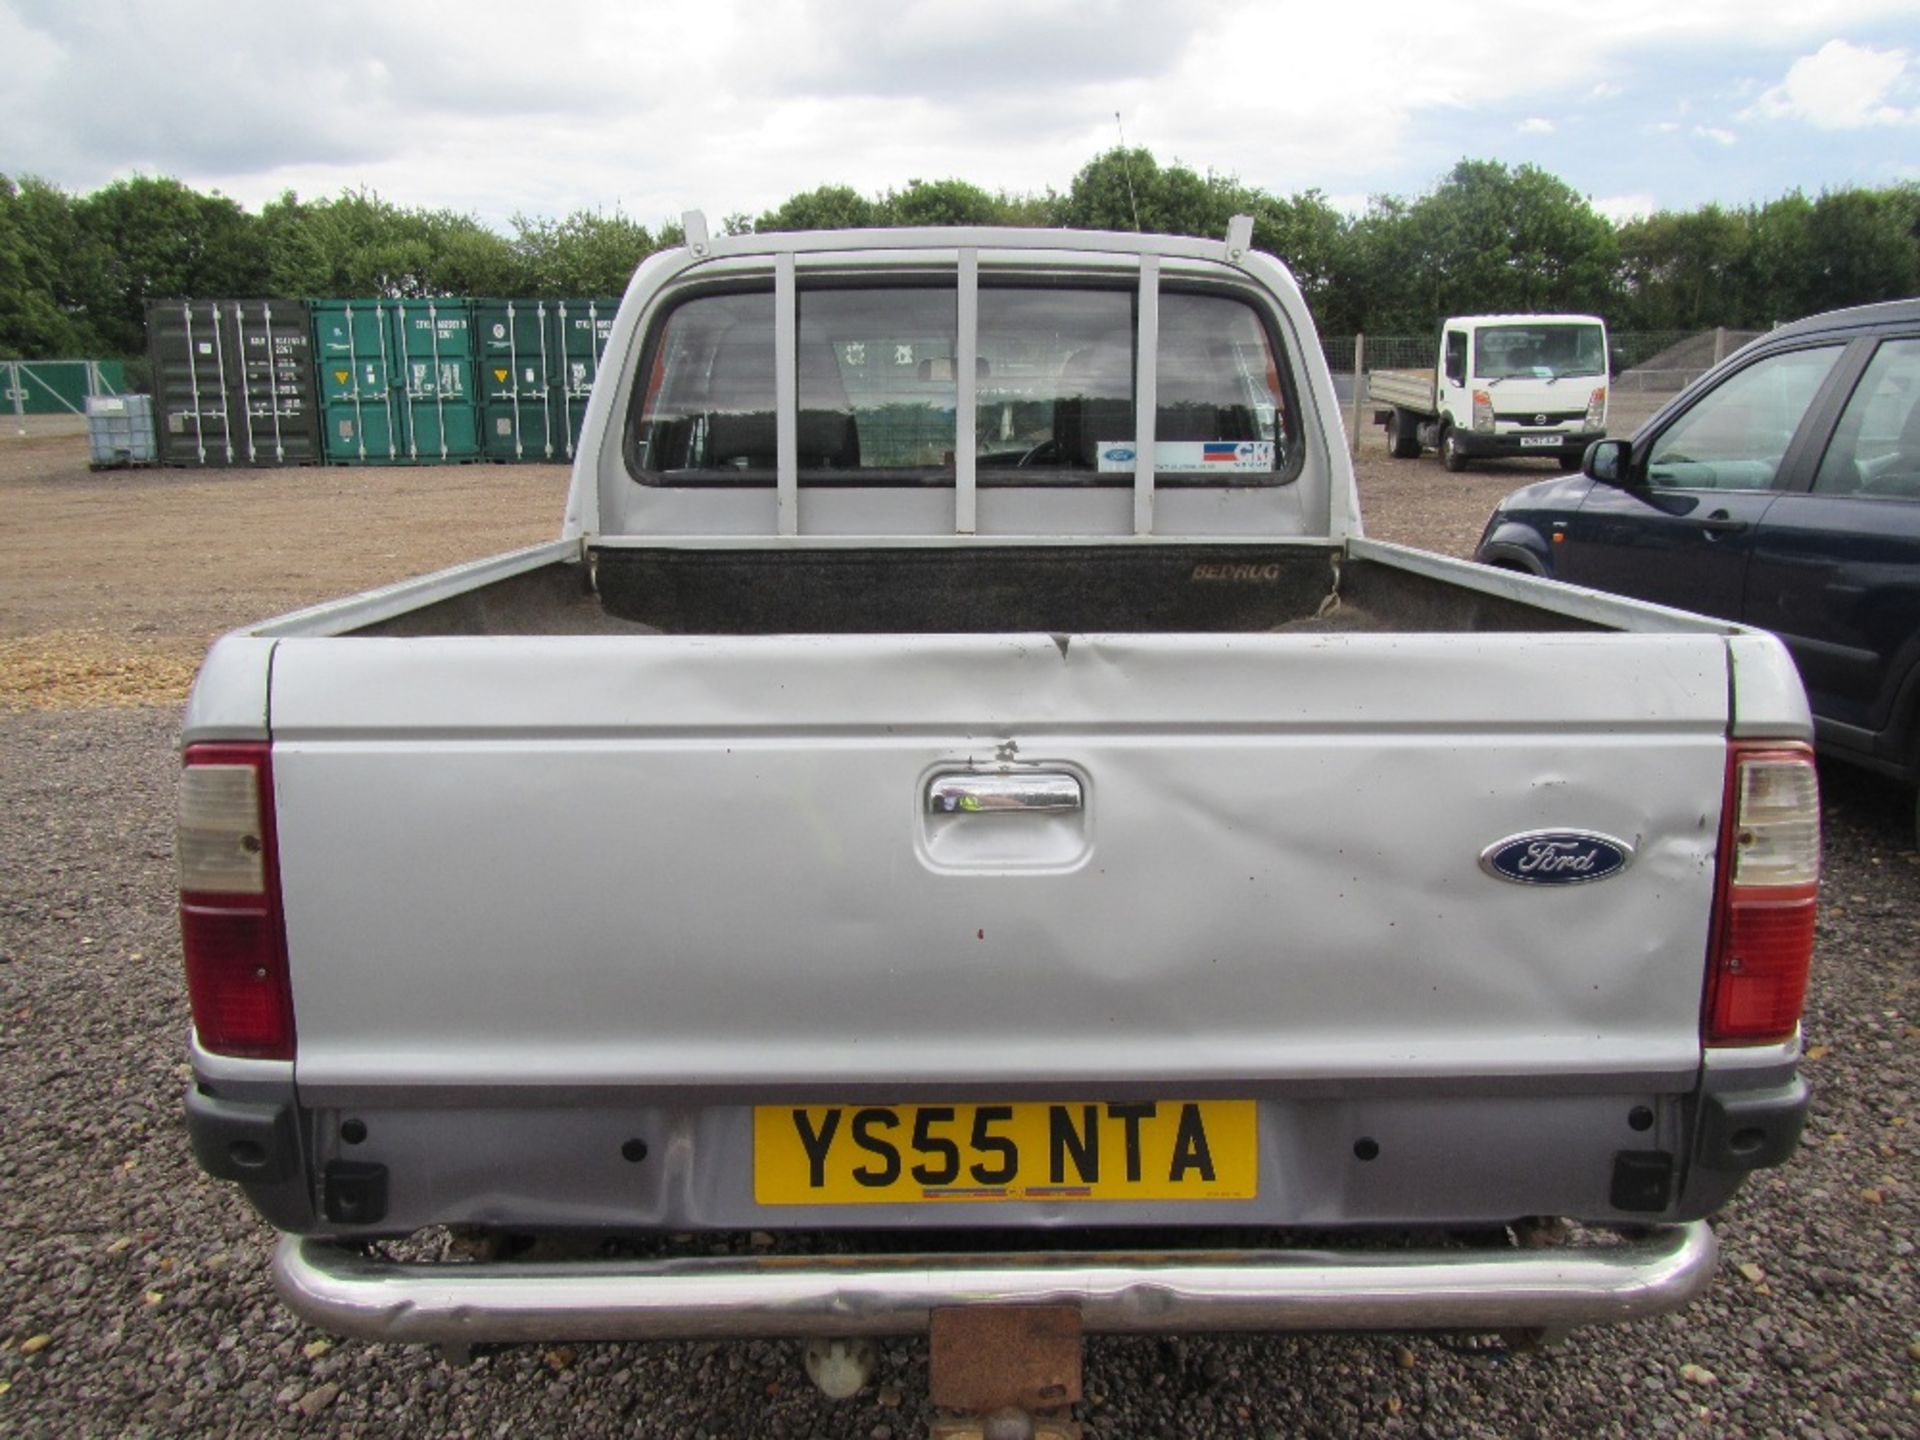 Ford Ranger 2.4 Diesel 5 Speed Manual with Crew Cab, Air Con & Leather Interior. Mileage: 116,000. - Image 4 of 5